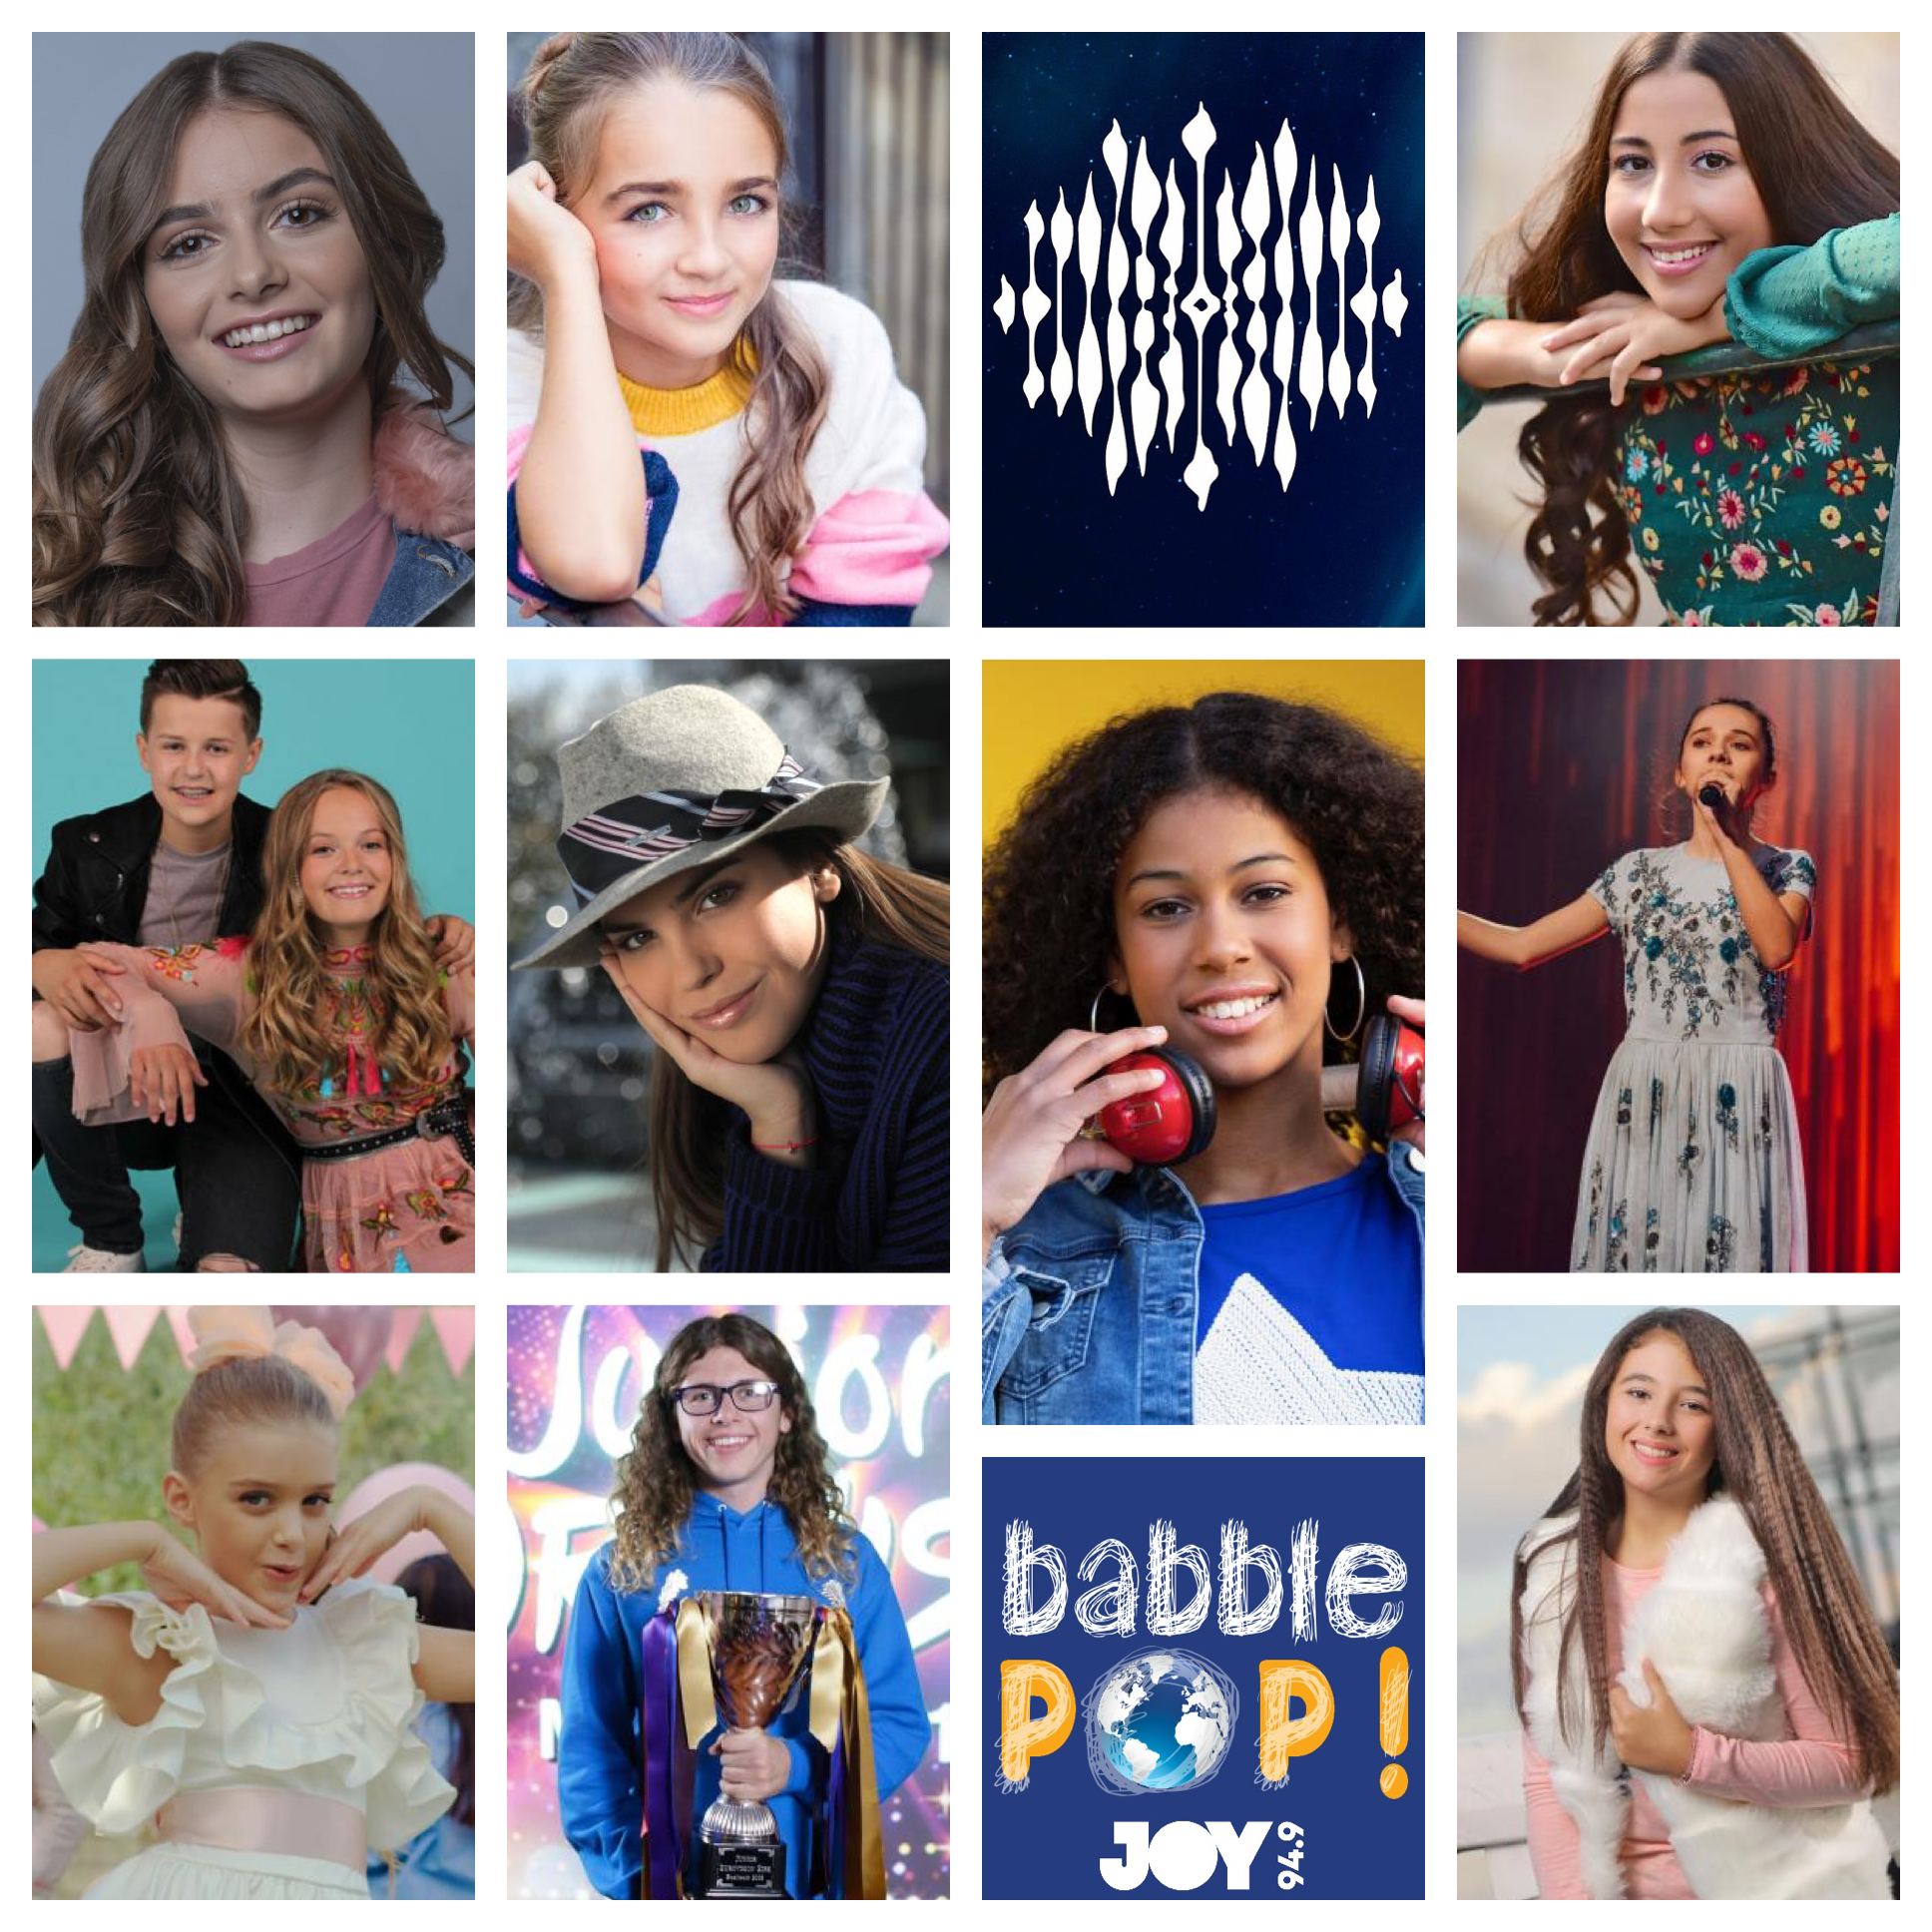 Previewing Junior Eurovision Song Contest 2018: Part 2